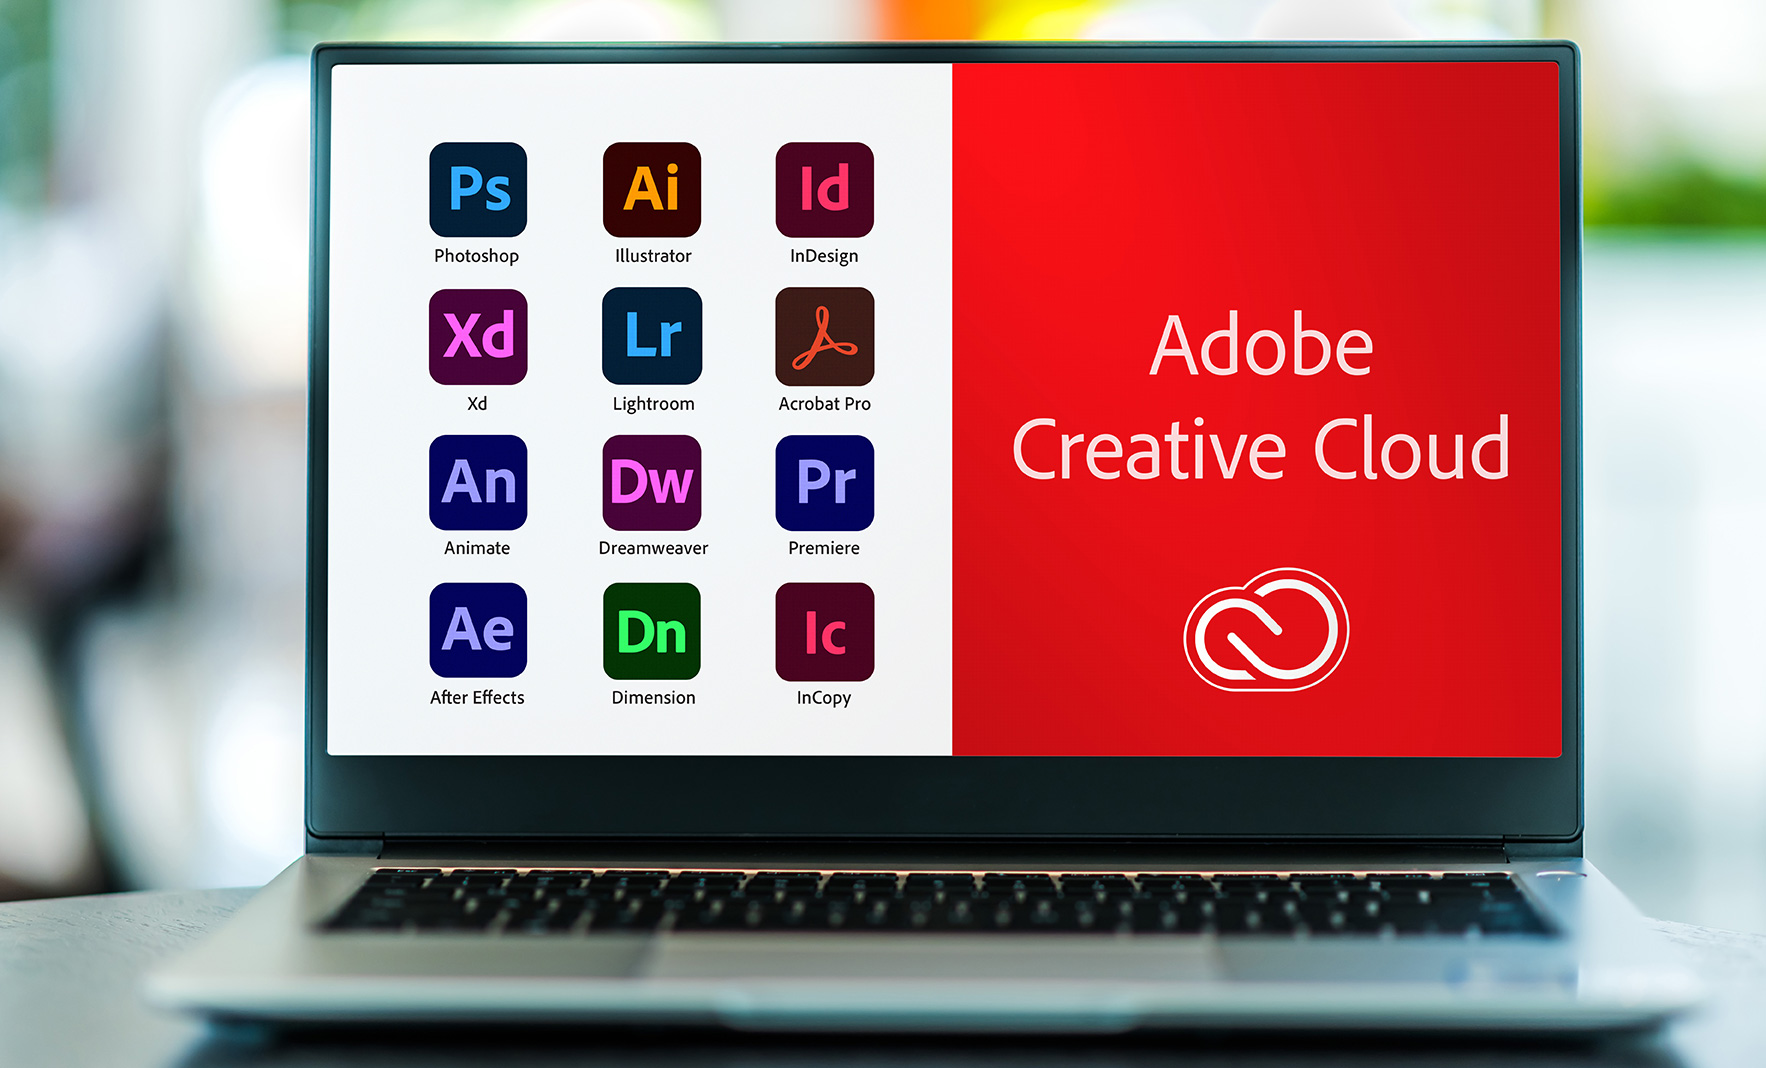 Laptop screen displaying icons for all Adobe Creative Cloud programs